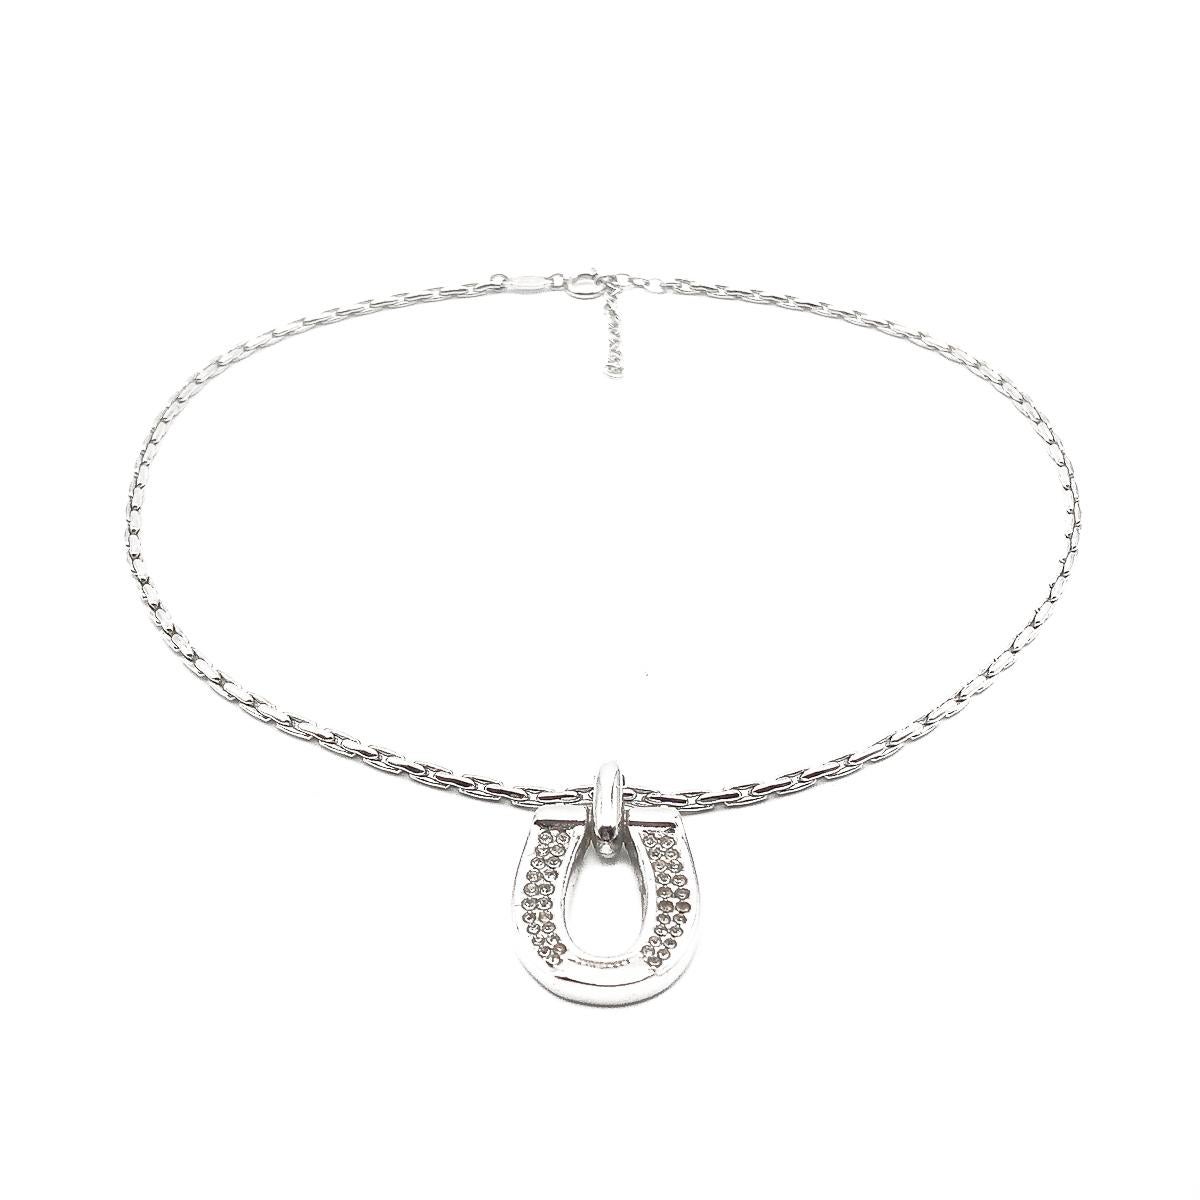 A vintage Dior Horseshoe necklace. Featuring a crystal set horseshoe on a fancy chain. Christian Dior himself was a great believer in the power of a talisman. 
Vintage Condition: Very good without damage or noteworthy wear. 
Materials: Rhodium